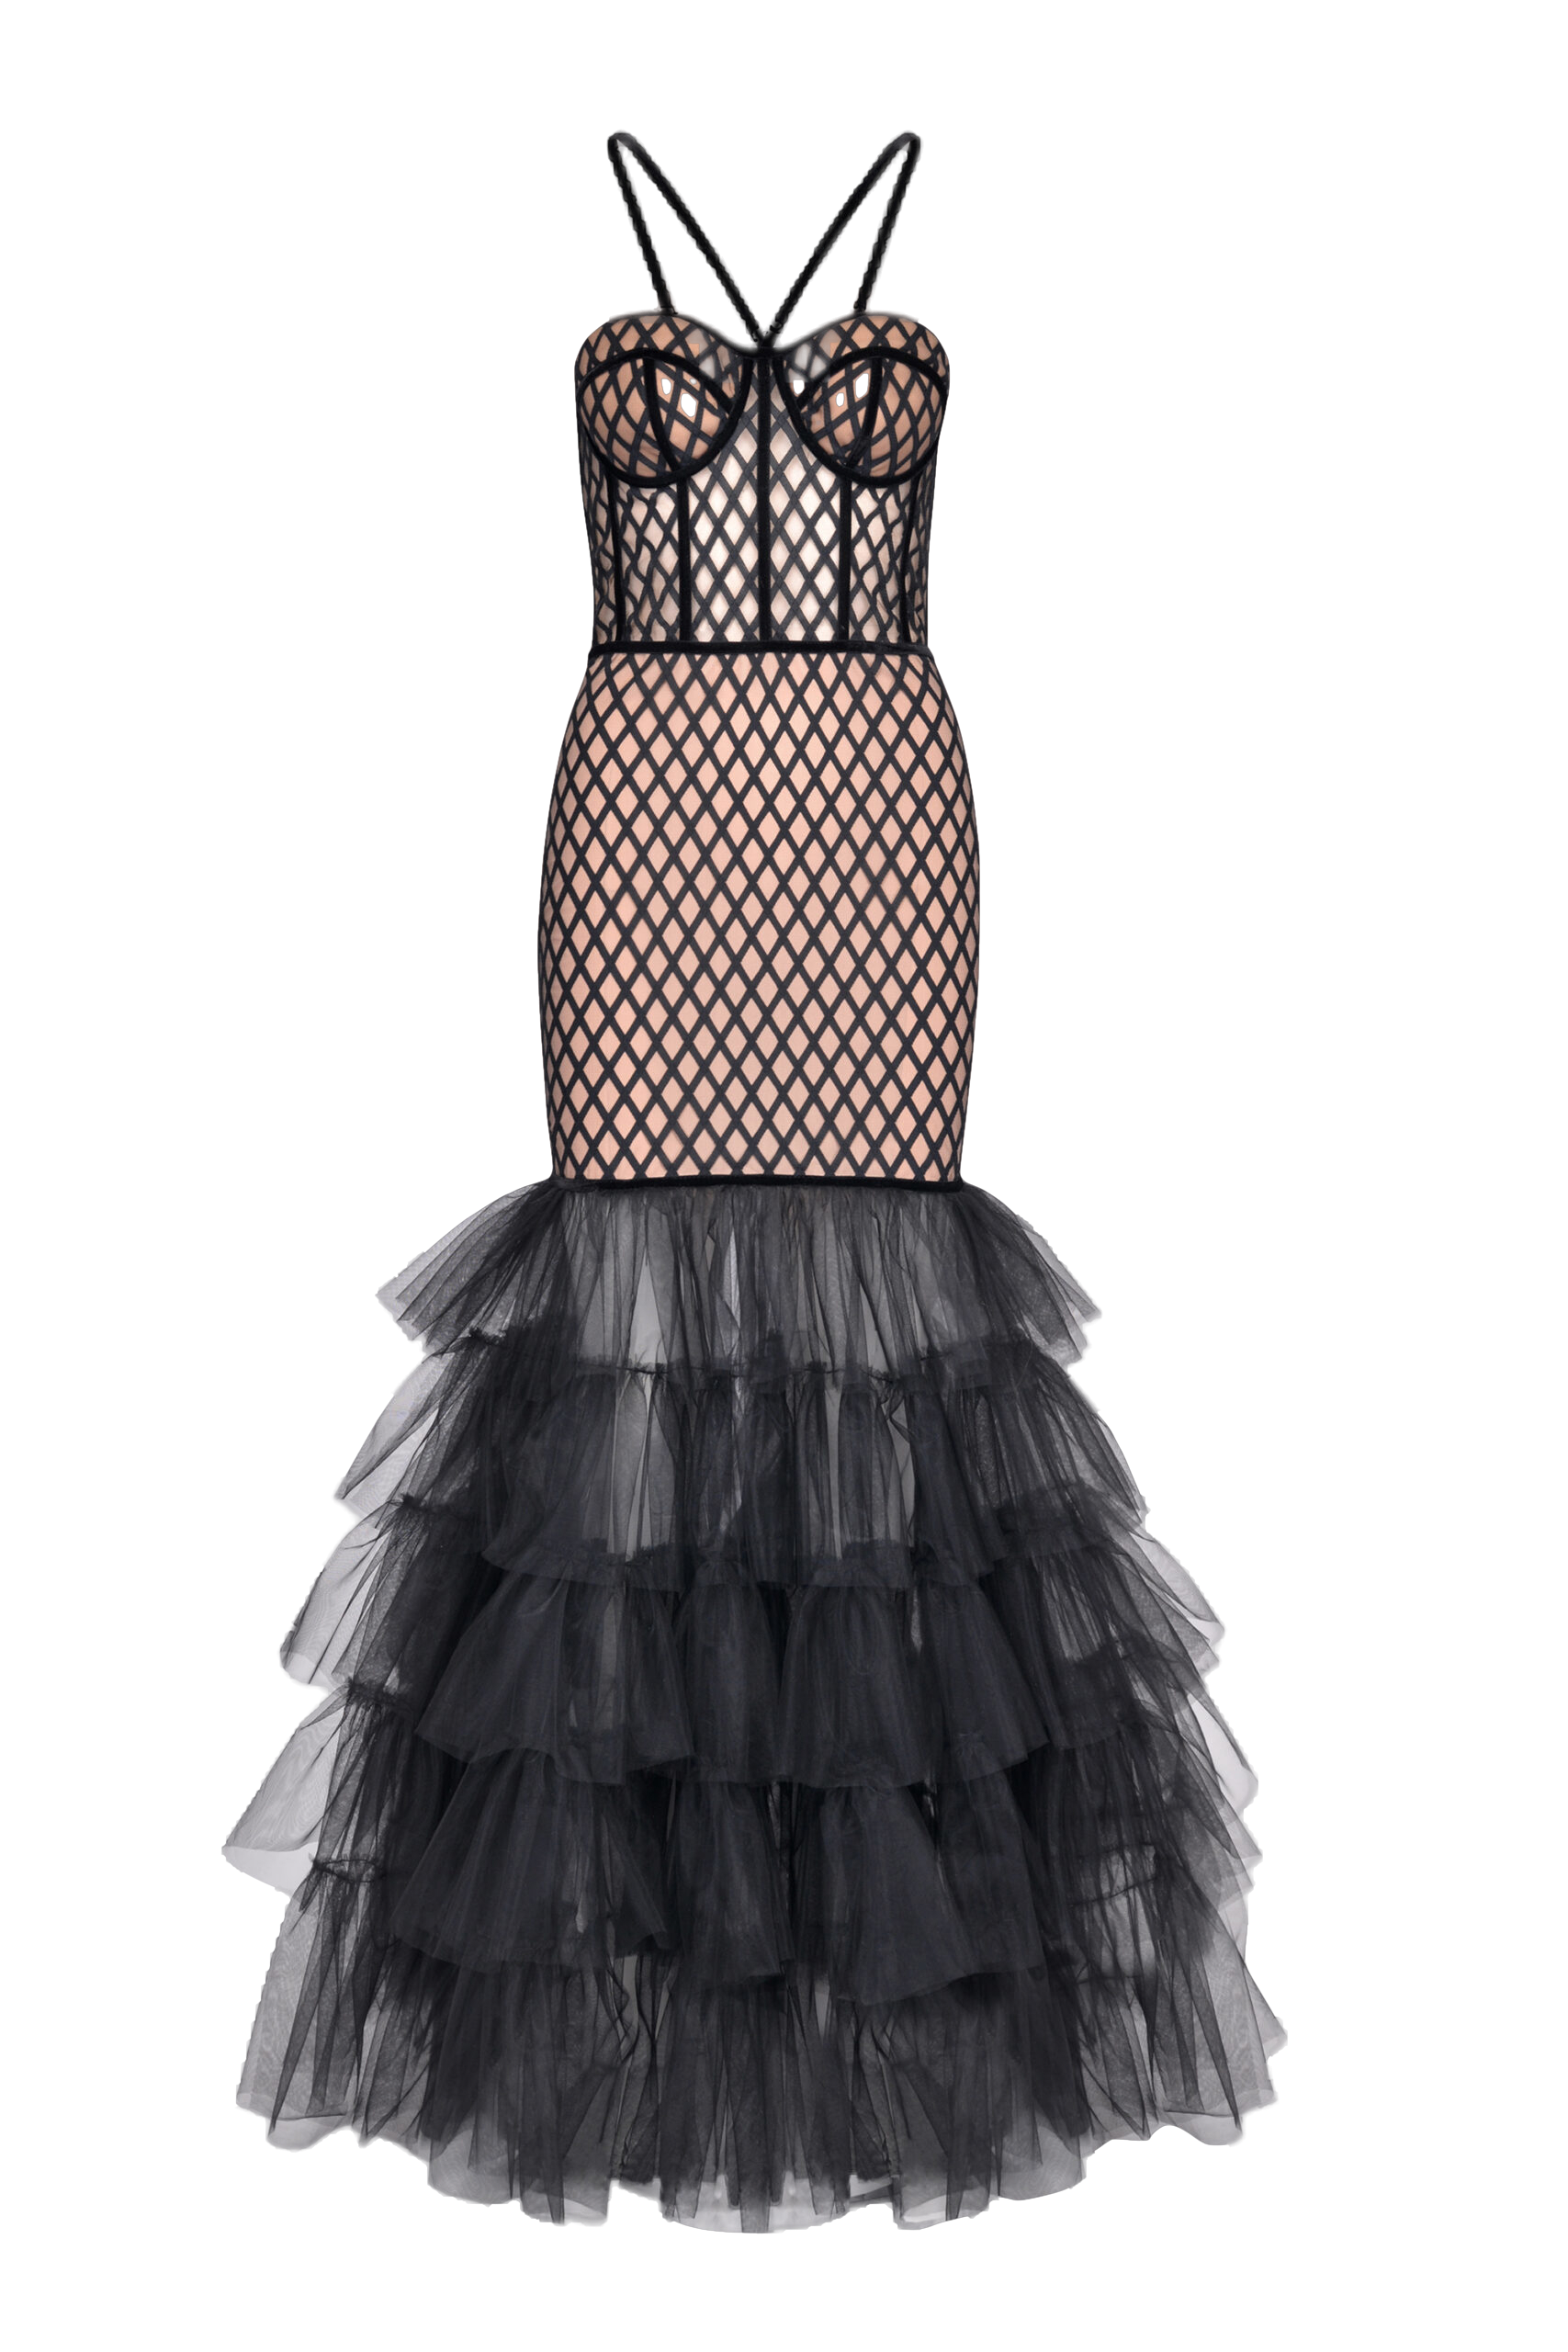 Sensual dress made of tulle with diamonds von Lily Was Here